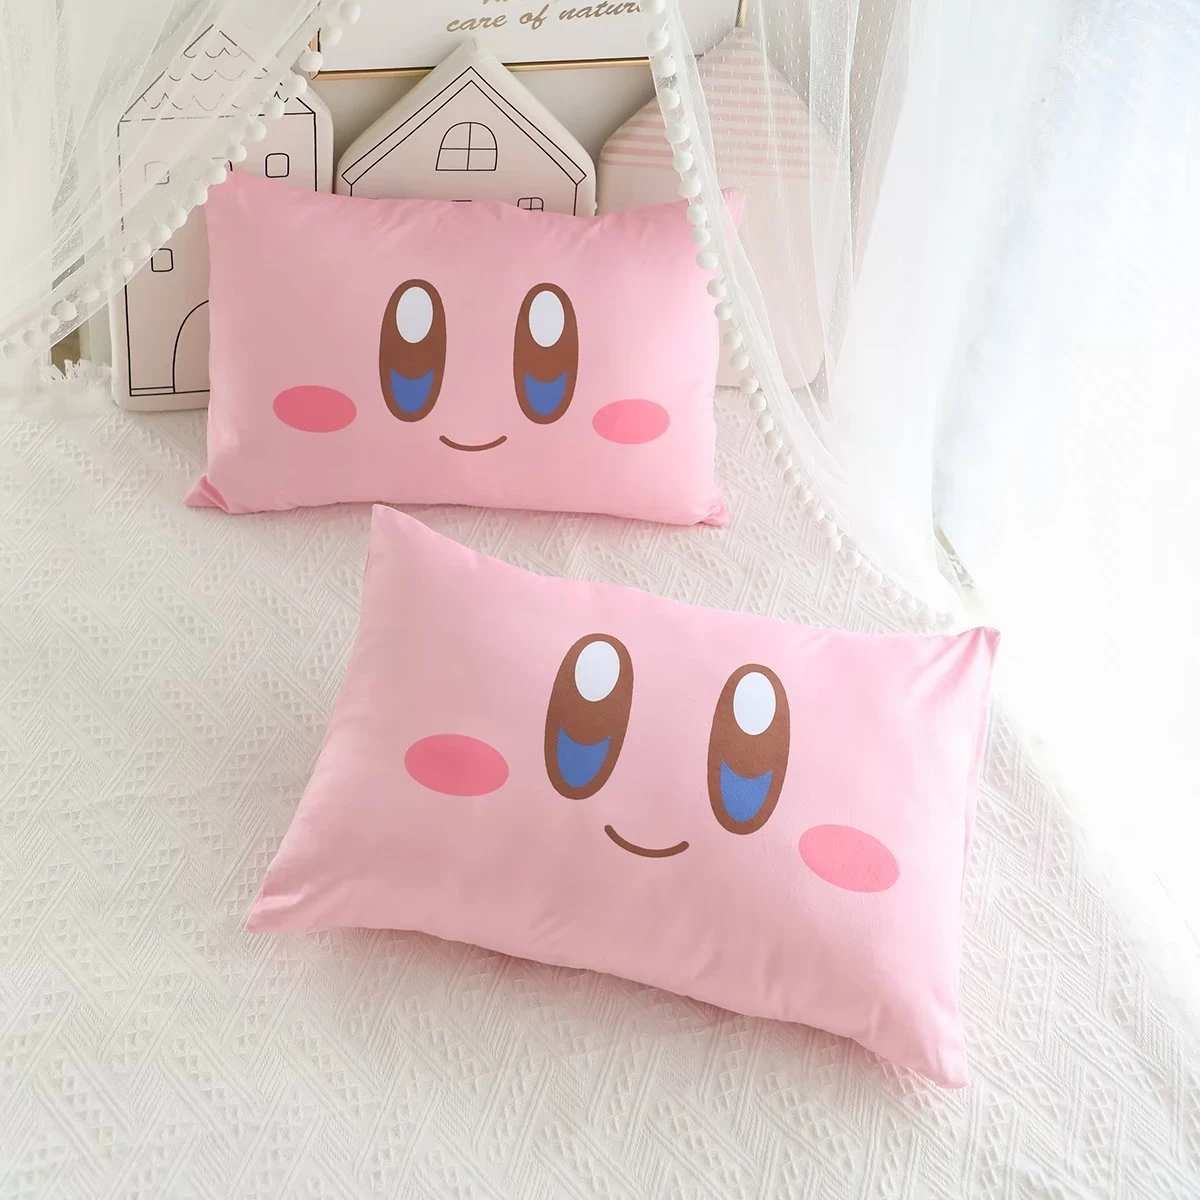 Cute Kirby Pillowcase Lovely Japanese Style Anime Double Sided Printing Pink Kirby Pillow Cover Home Decor 4 - Kirby Plush